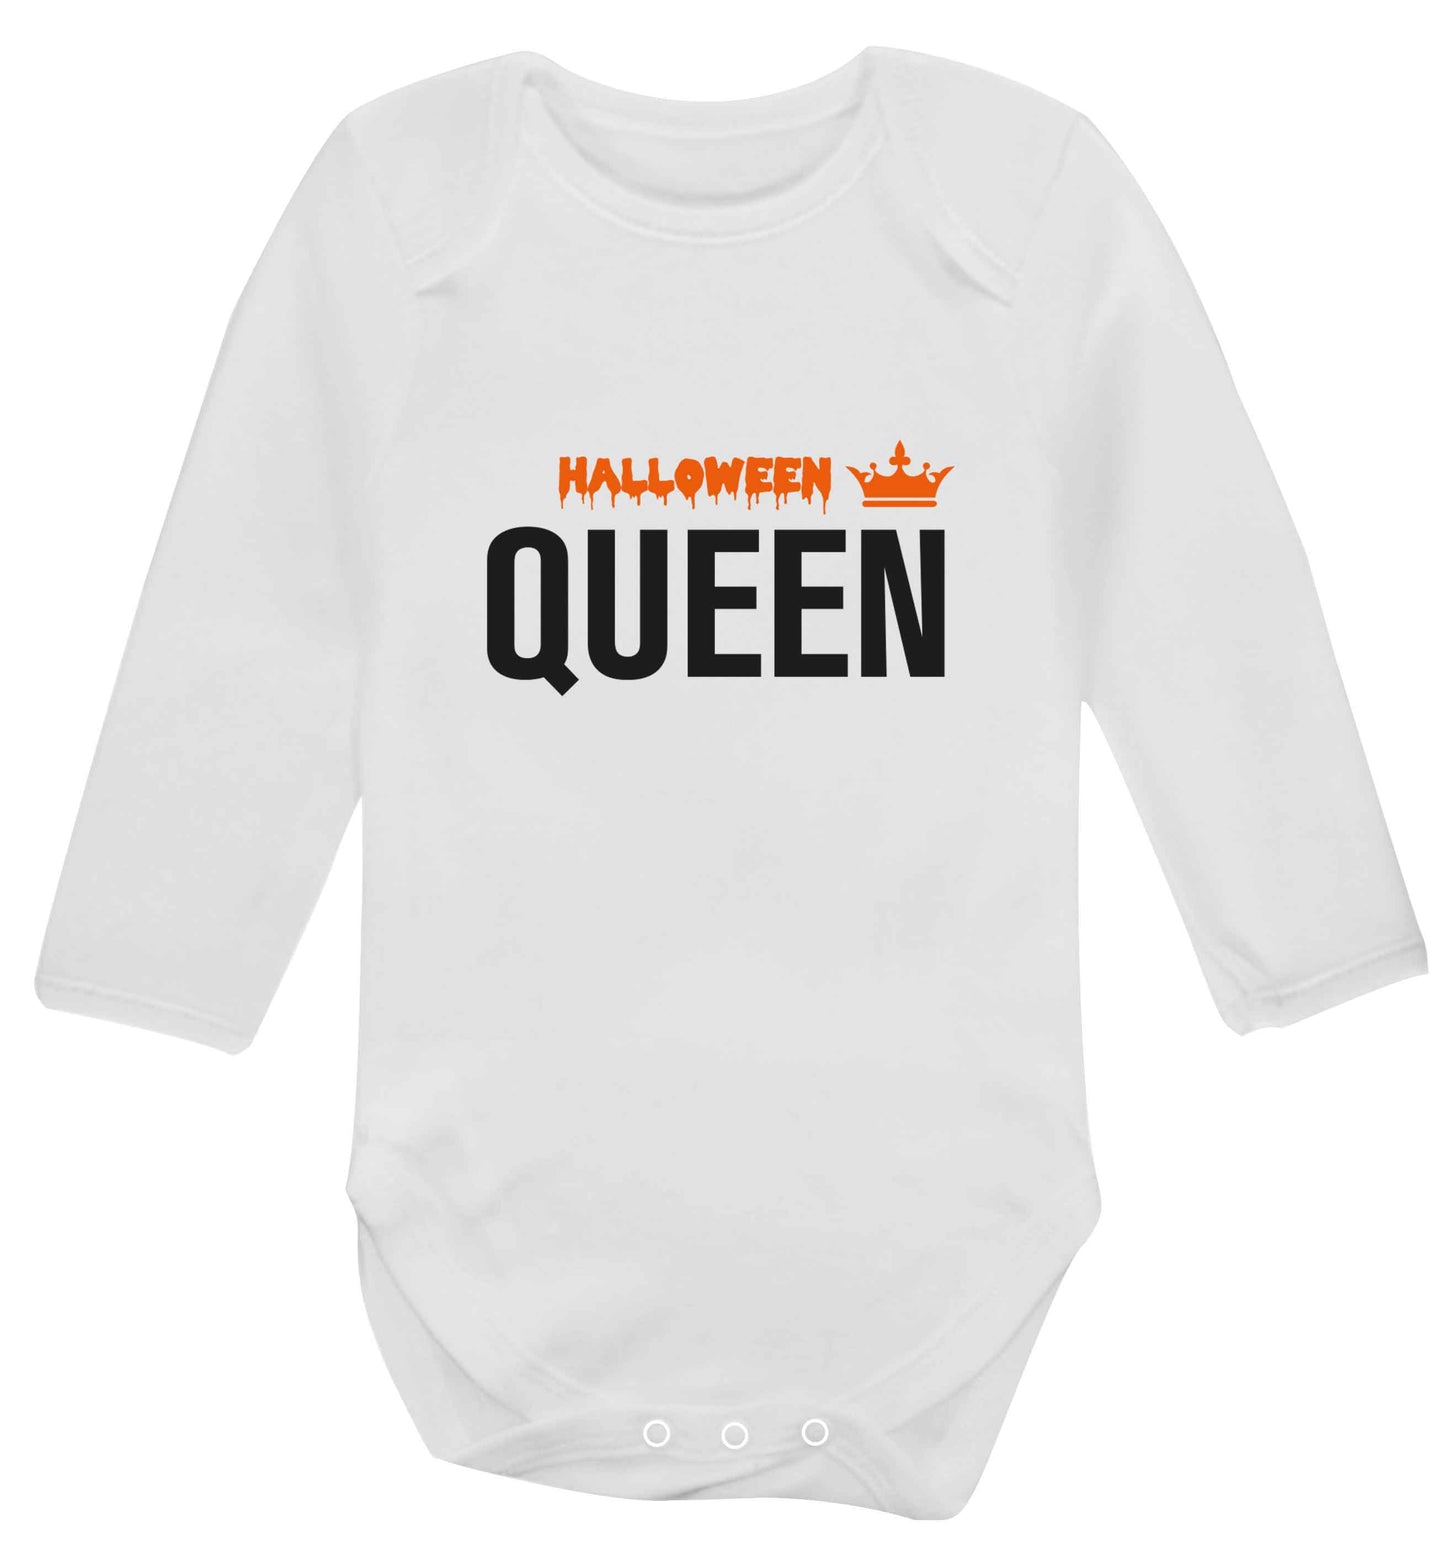 Halloween queen baby vest long sleeved white 6-12 months